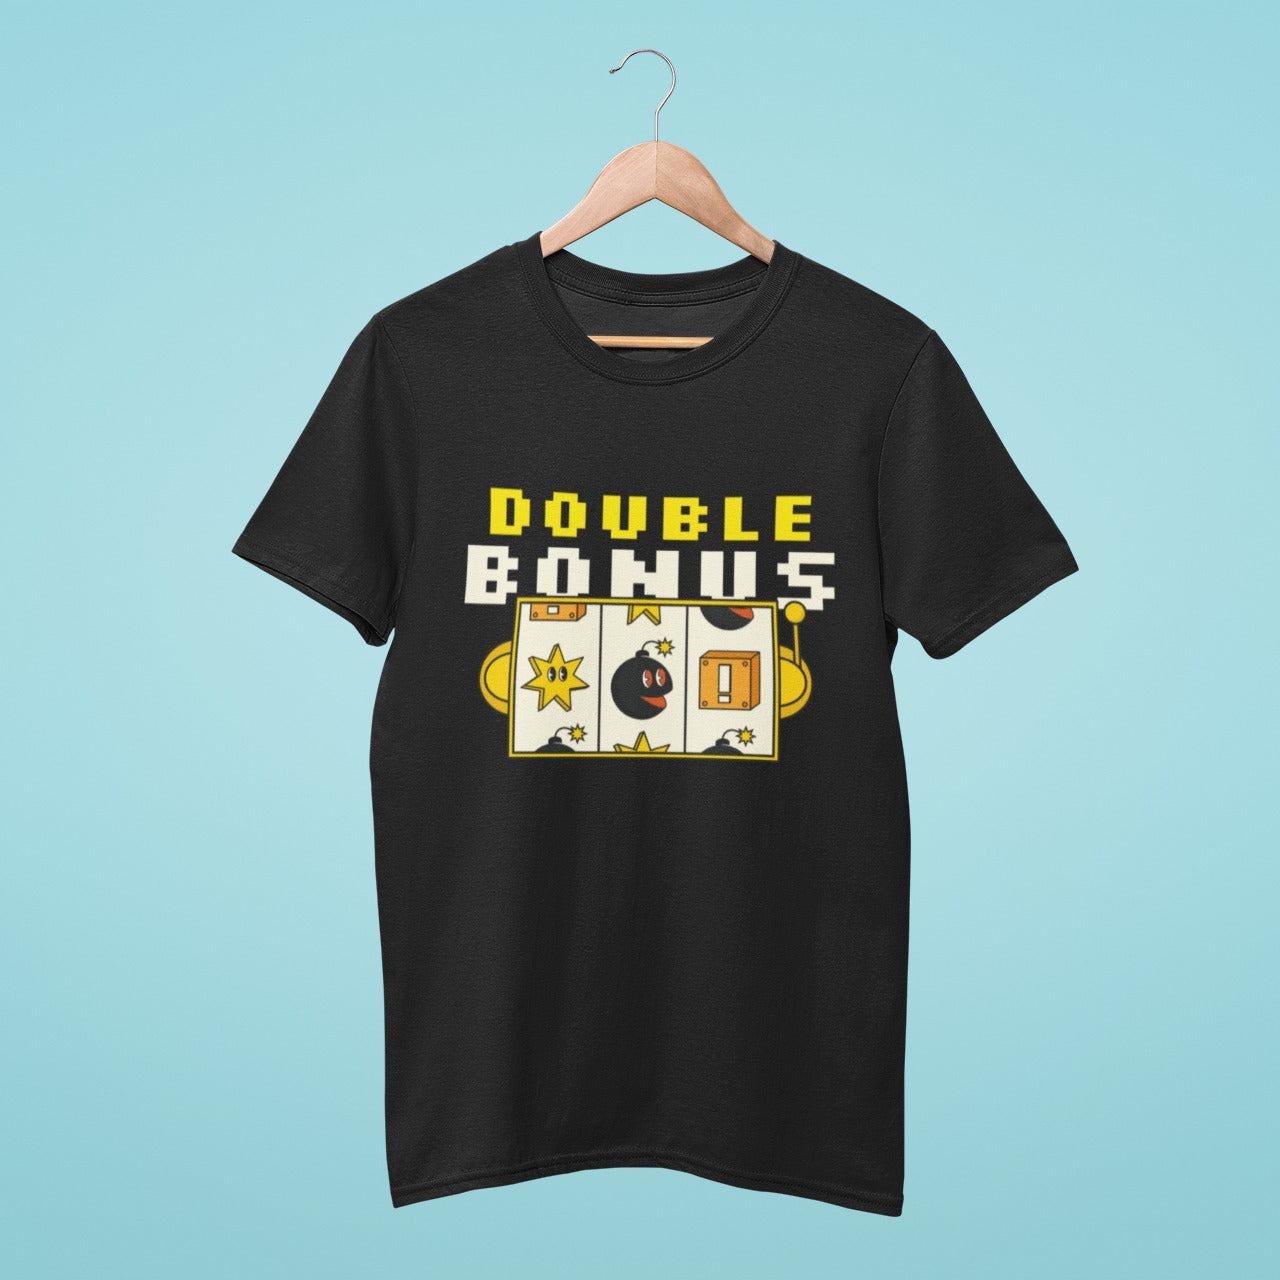 Looking for a stylish t-shirt that shows off your love for gambling? Our black t-shirt features a slot machine design with "Double Bonus" slogan. Made with high-quality materials, this comfortable and durable t-shirt is perfect for casino trips or everyday wear. Order now and show off your love for gambling in style!